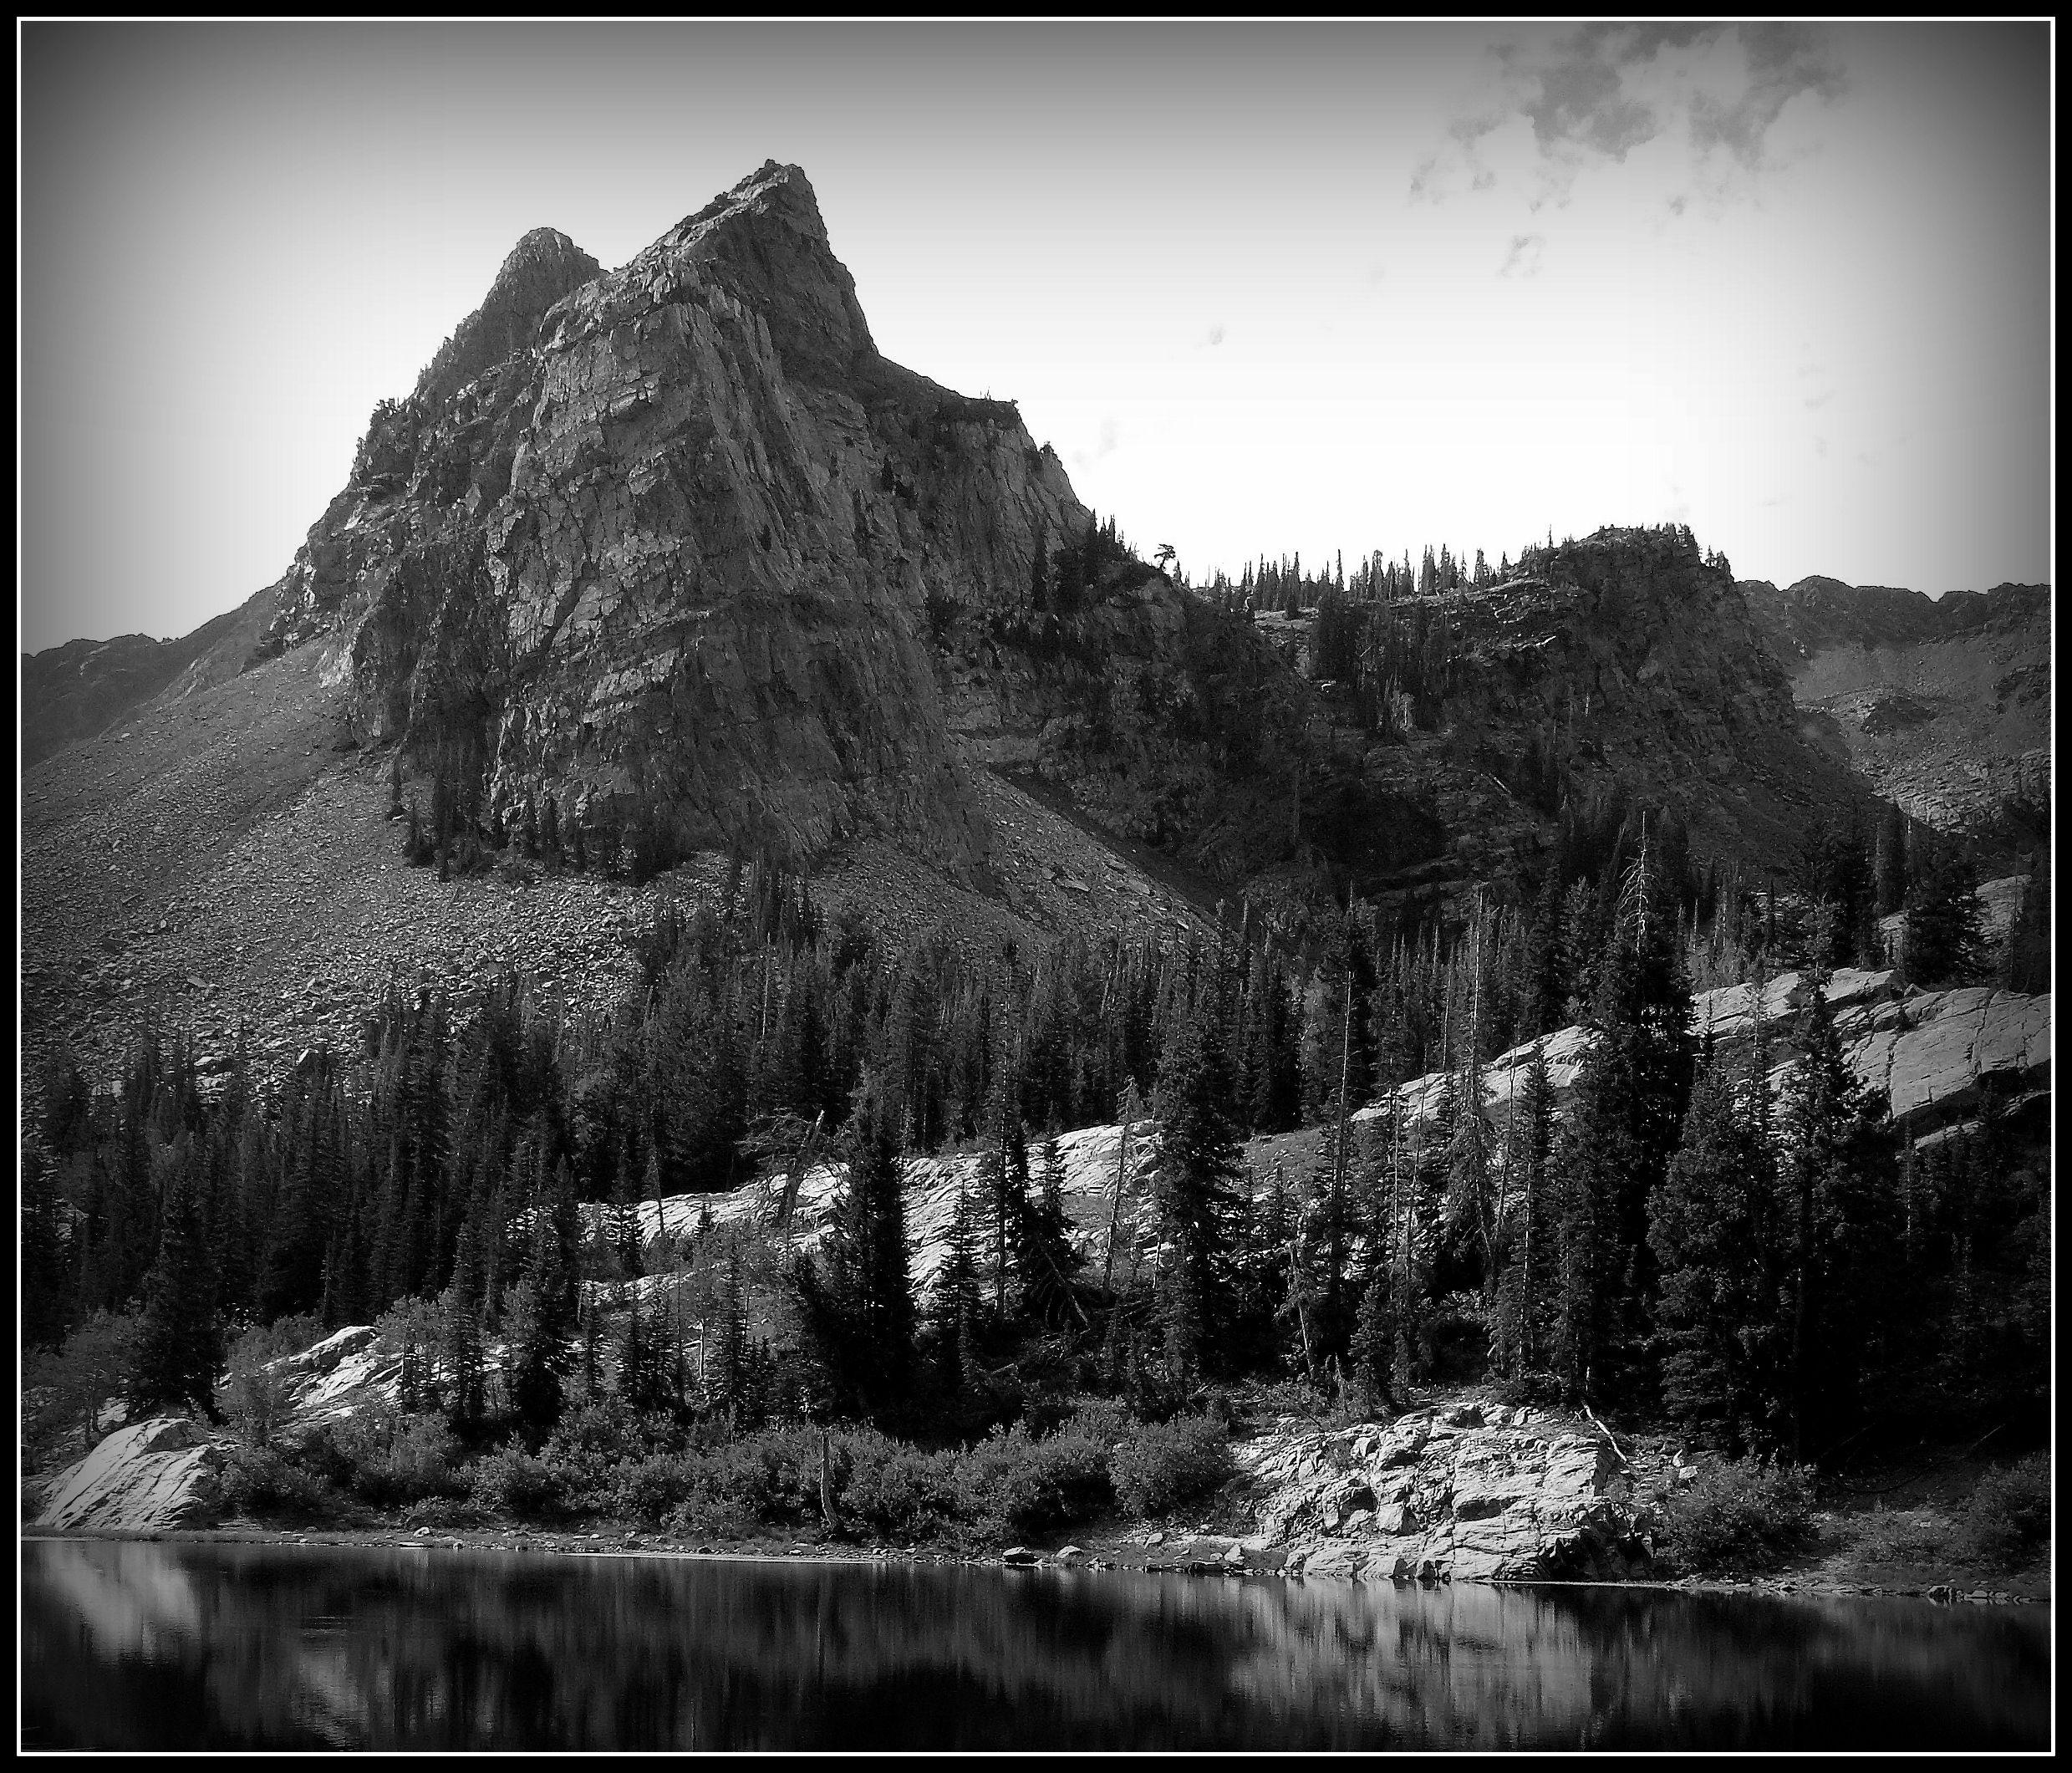 Black and White Mountain Peak Logo - Sundial Peak in Black and White | Scott's Place...Images and Words